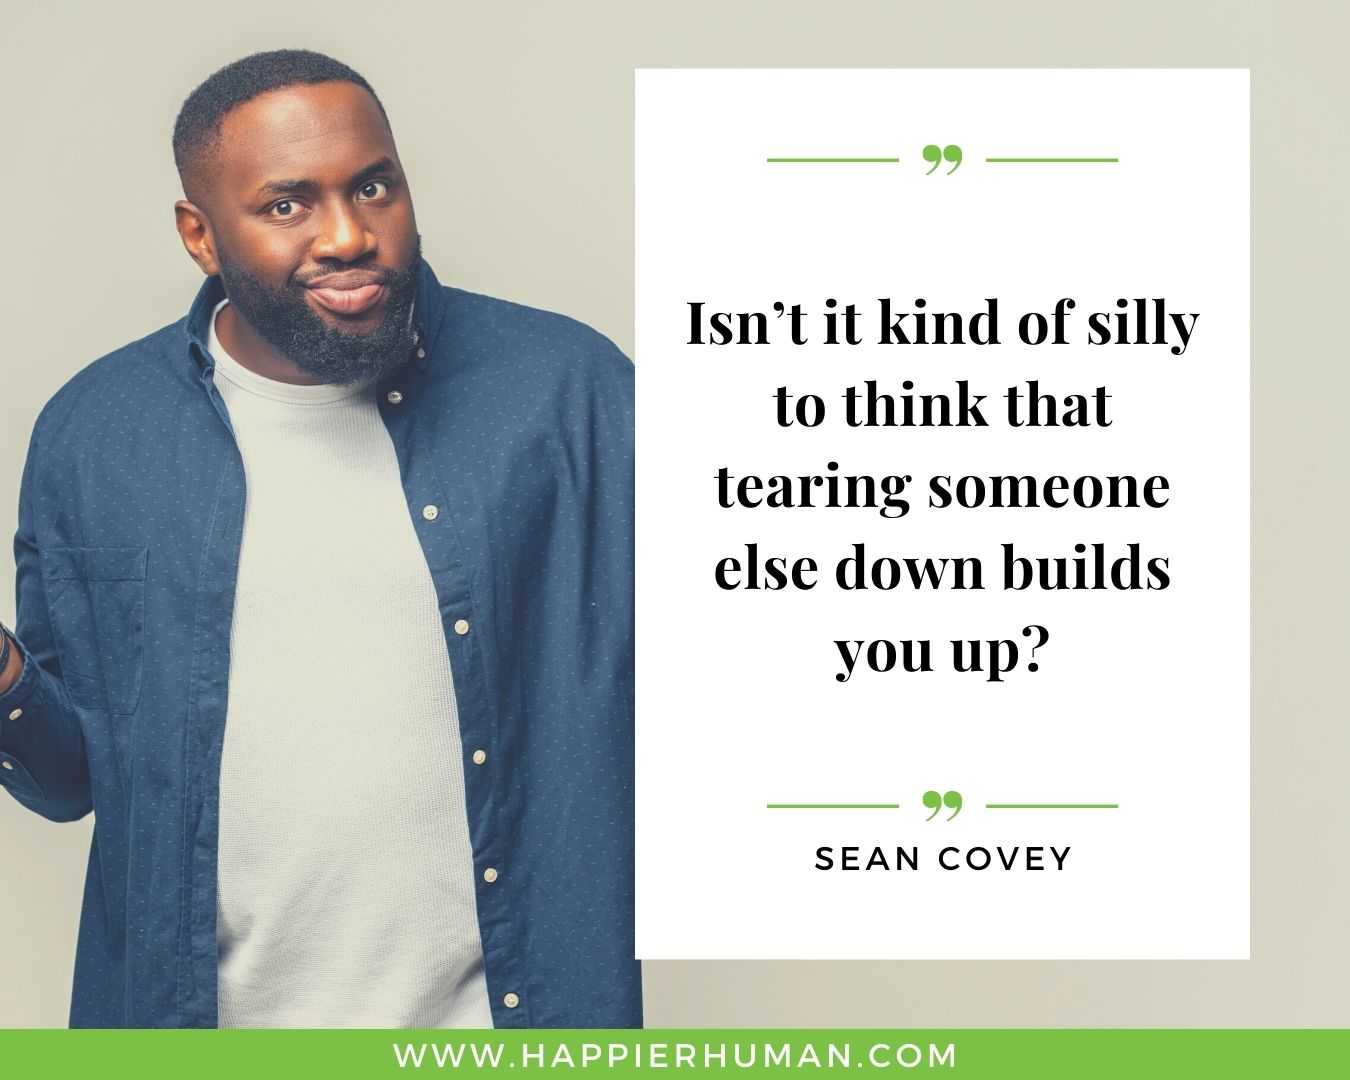 Haters Quotes - “Isn’t it kind of silly to think that tearing someone else down builds you up?” - Sean Covey